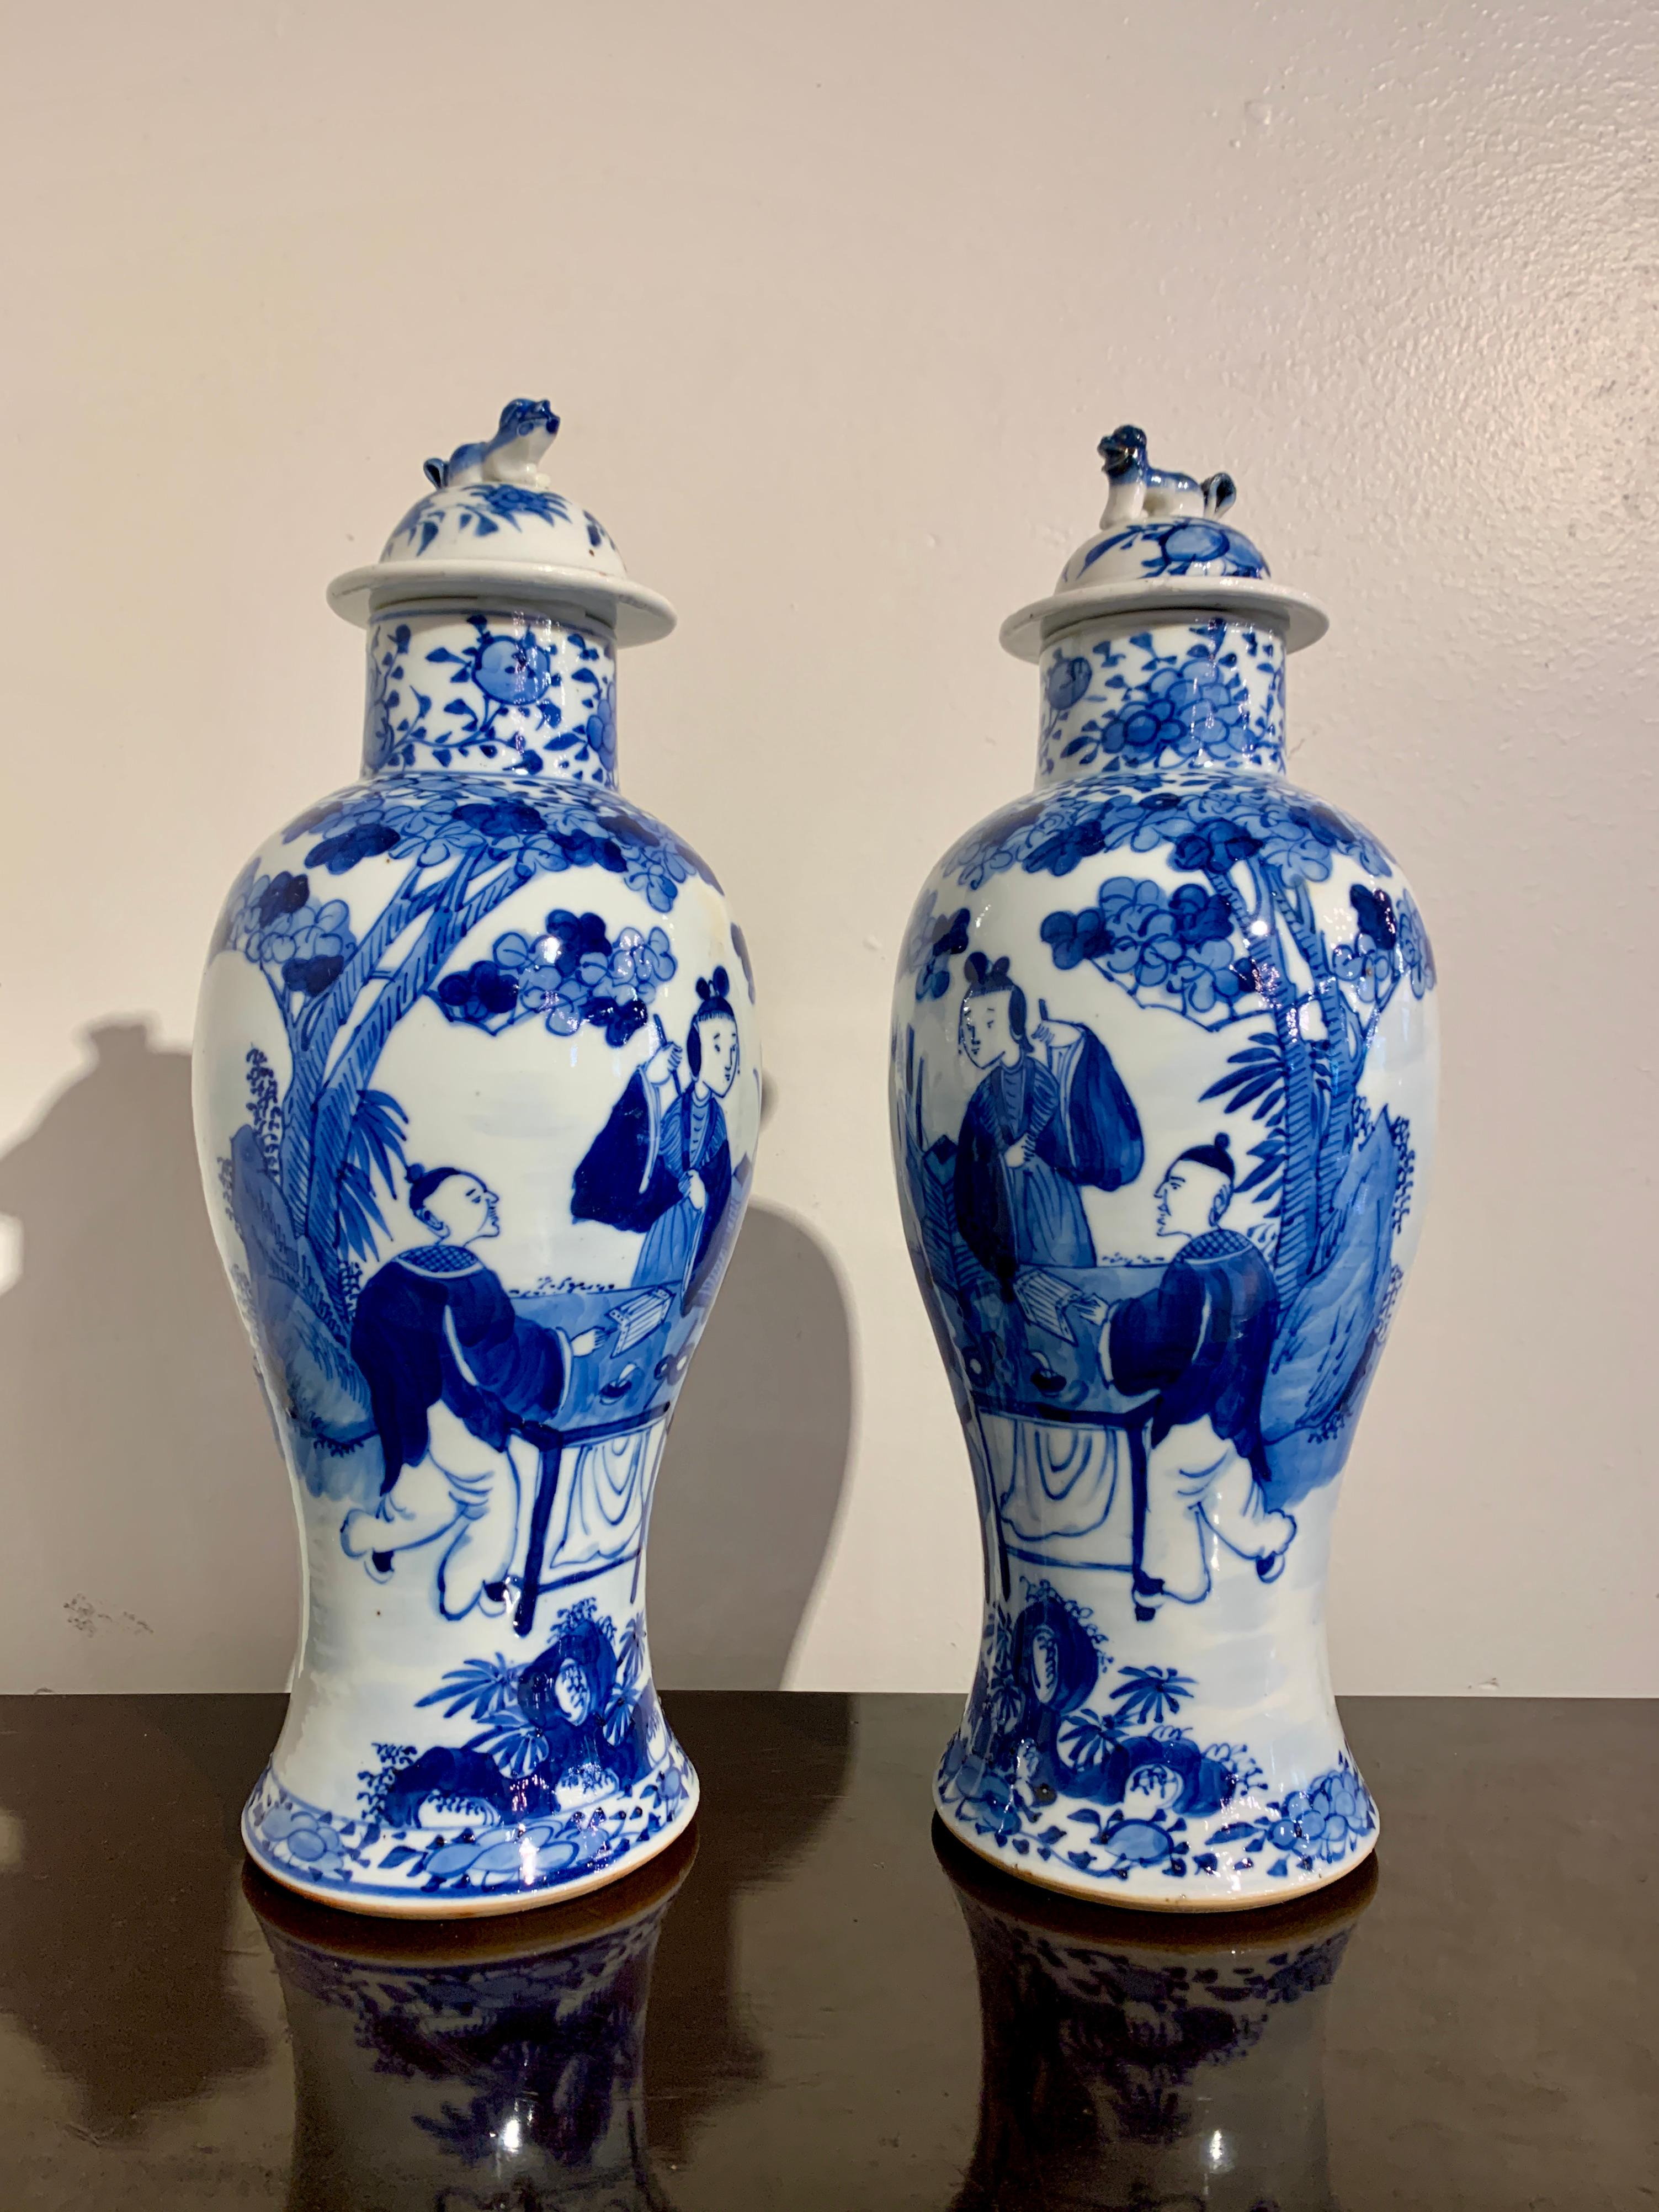 Glazed Pair Chinese Blue and White Covered Baluster Vases, Late 19th Century, China